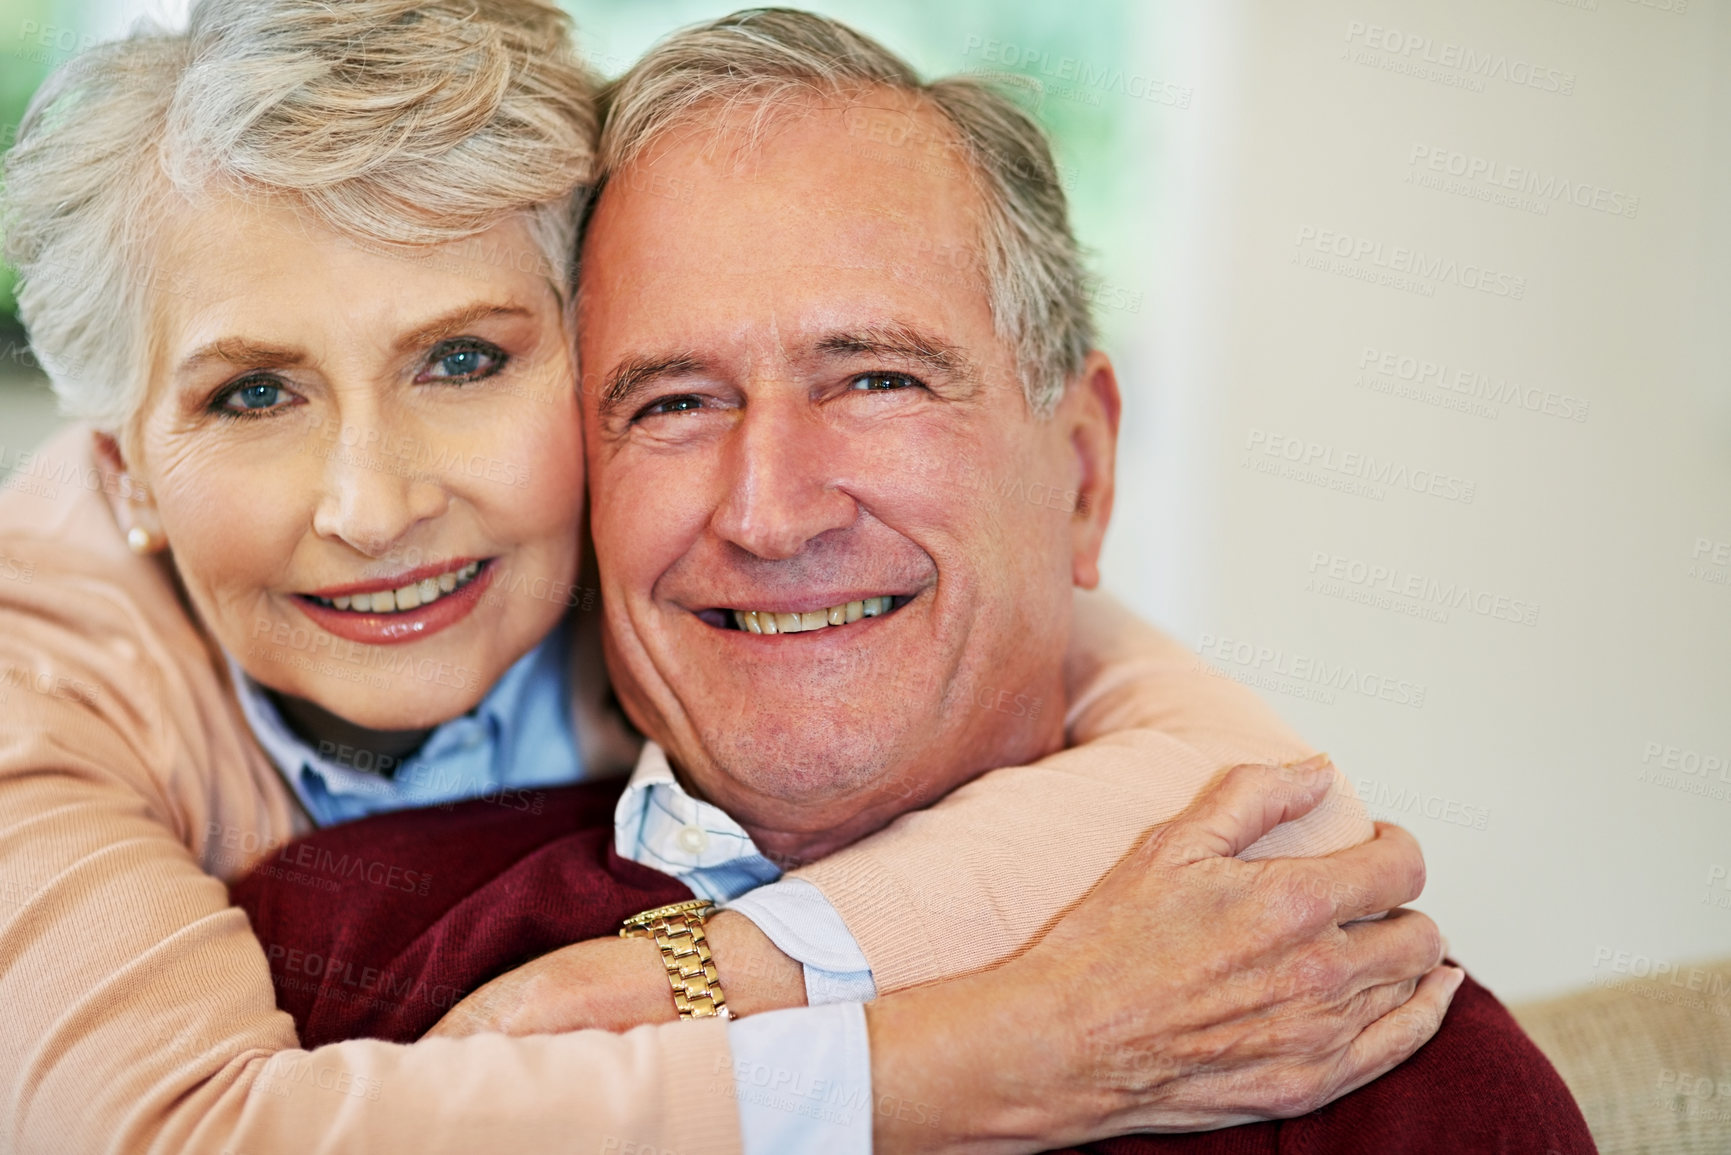 Buy stock photo Shot of a senior woman embracing her husband from behind